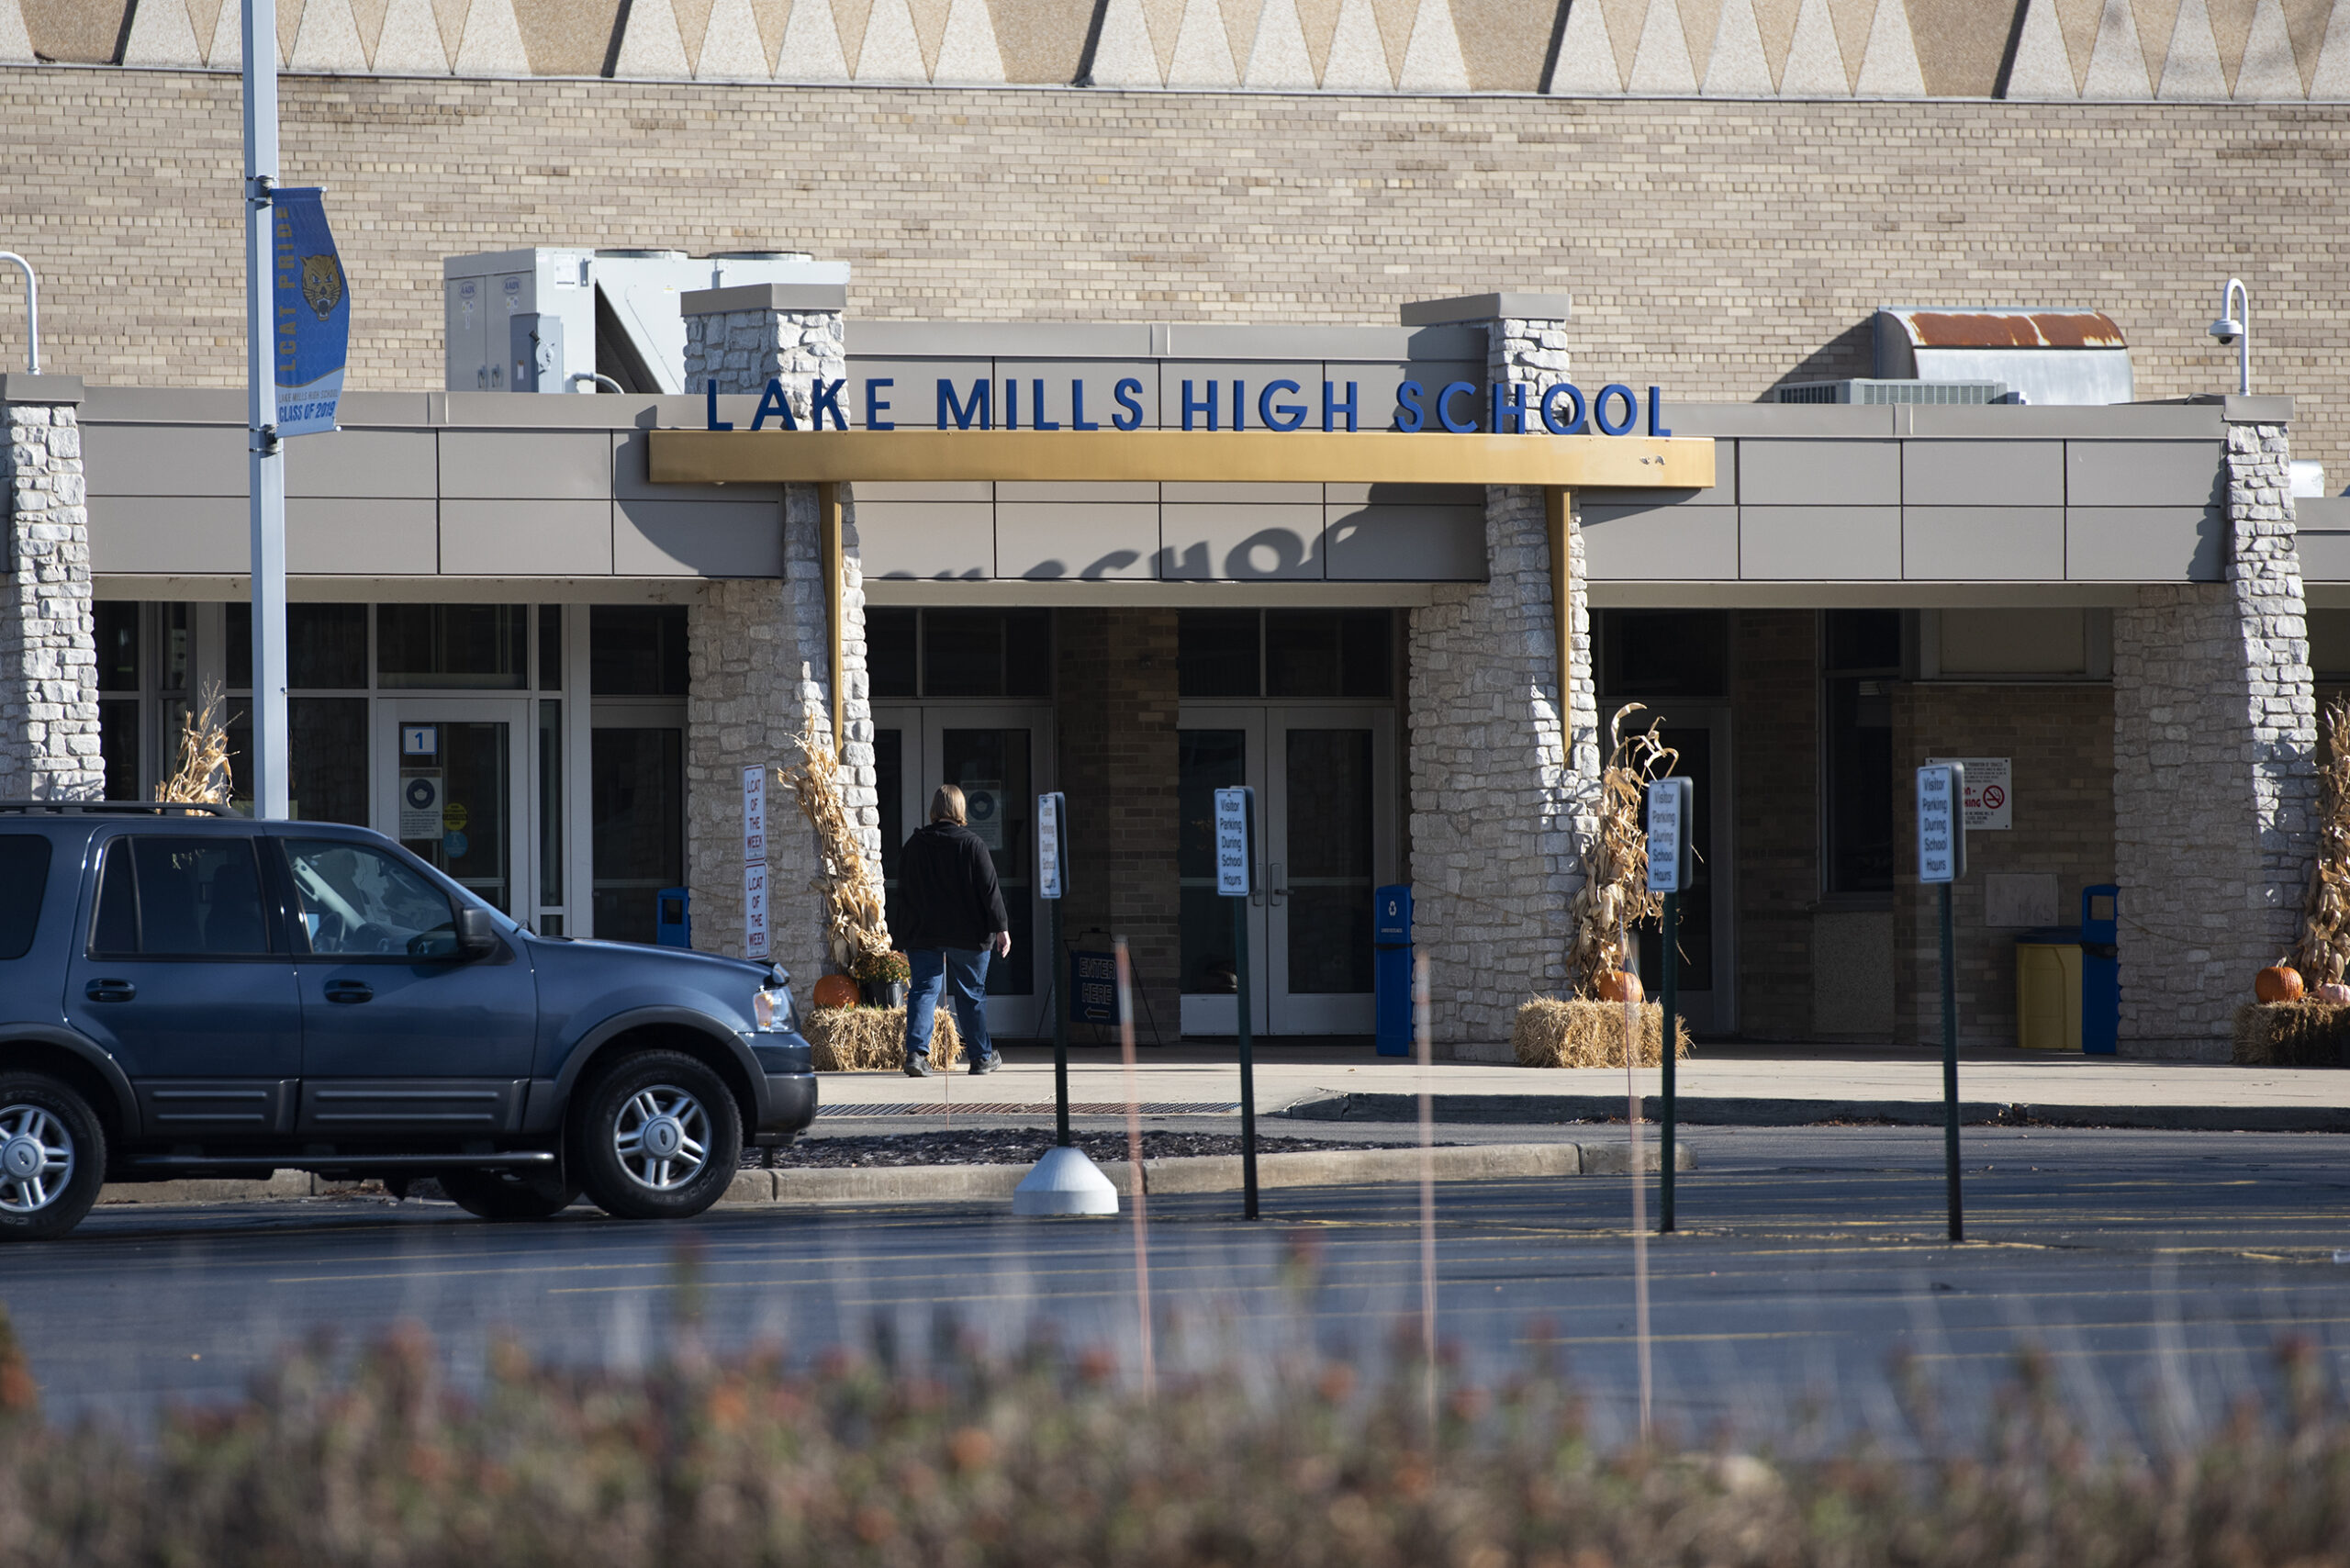 The front of Lake Mills High School is labeled with a sign